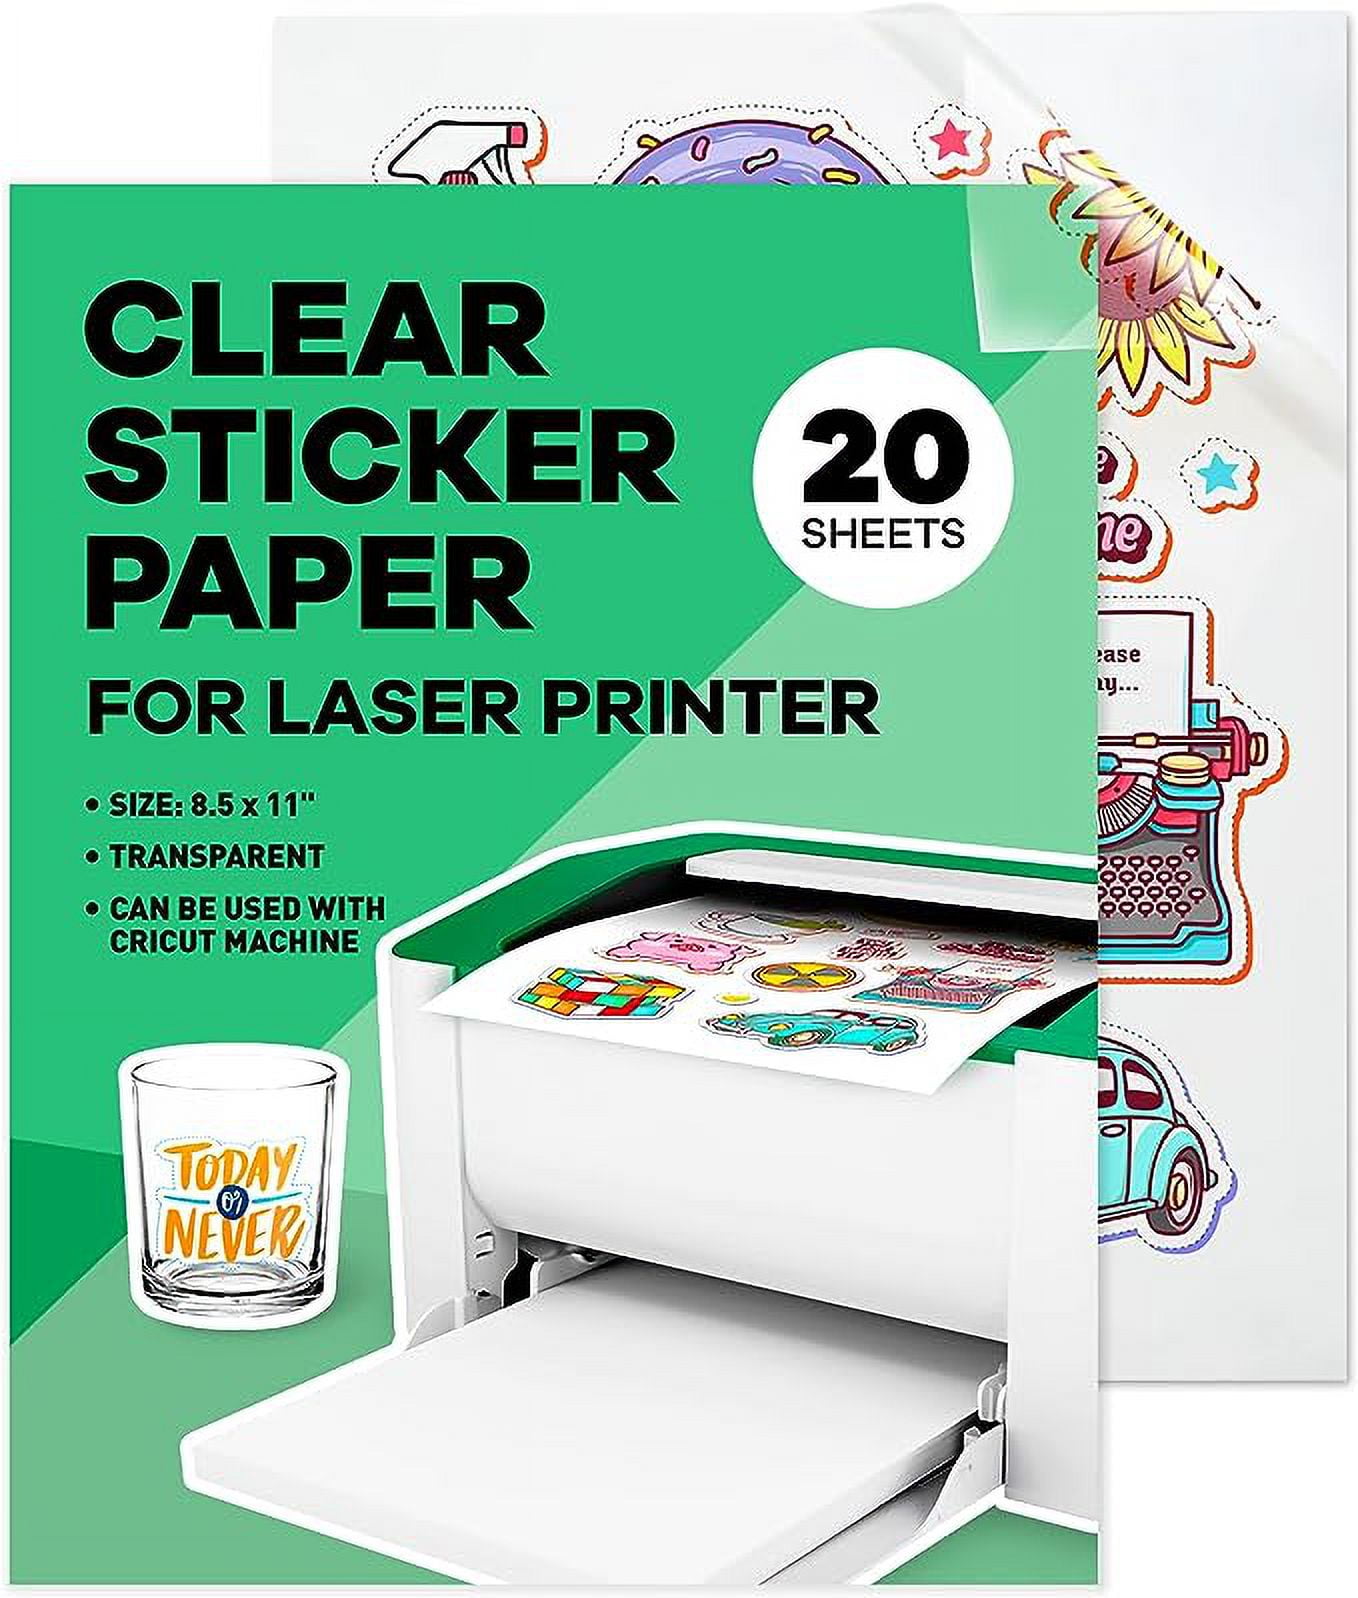 Clear Sticker Paper for Laser Printer (20 Sheets) - Vinyl Sticker Paper for  Laser Printer - 8.5 x 11 - Glossy - Sticker Paper for Printer - Sticker